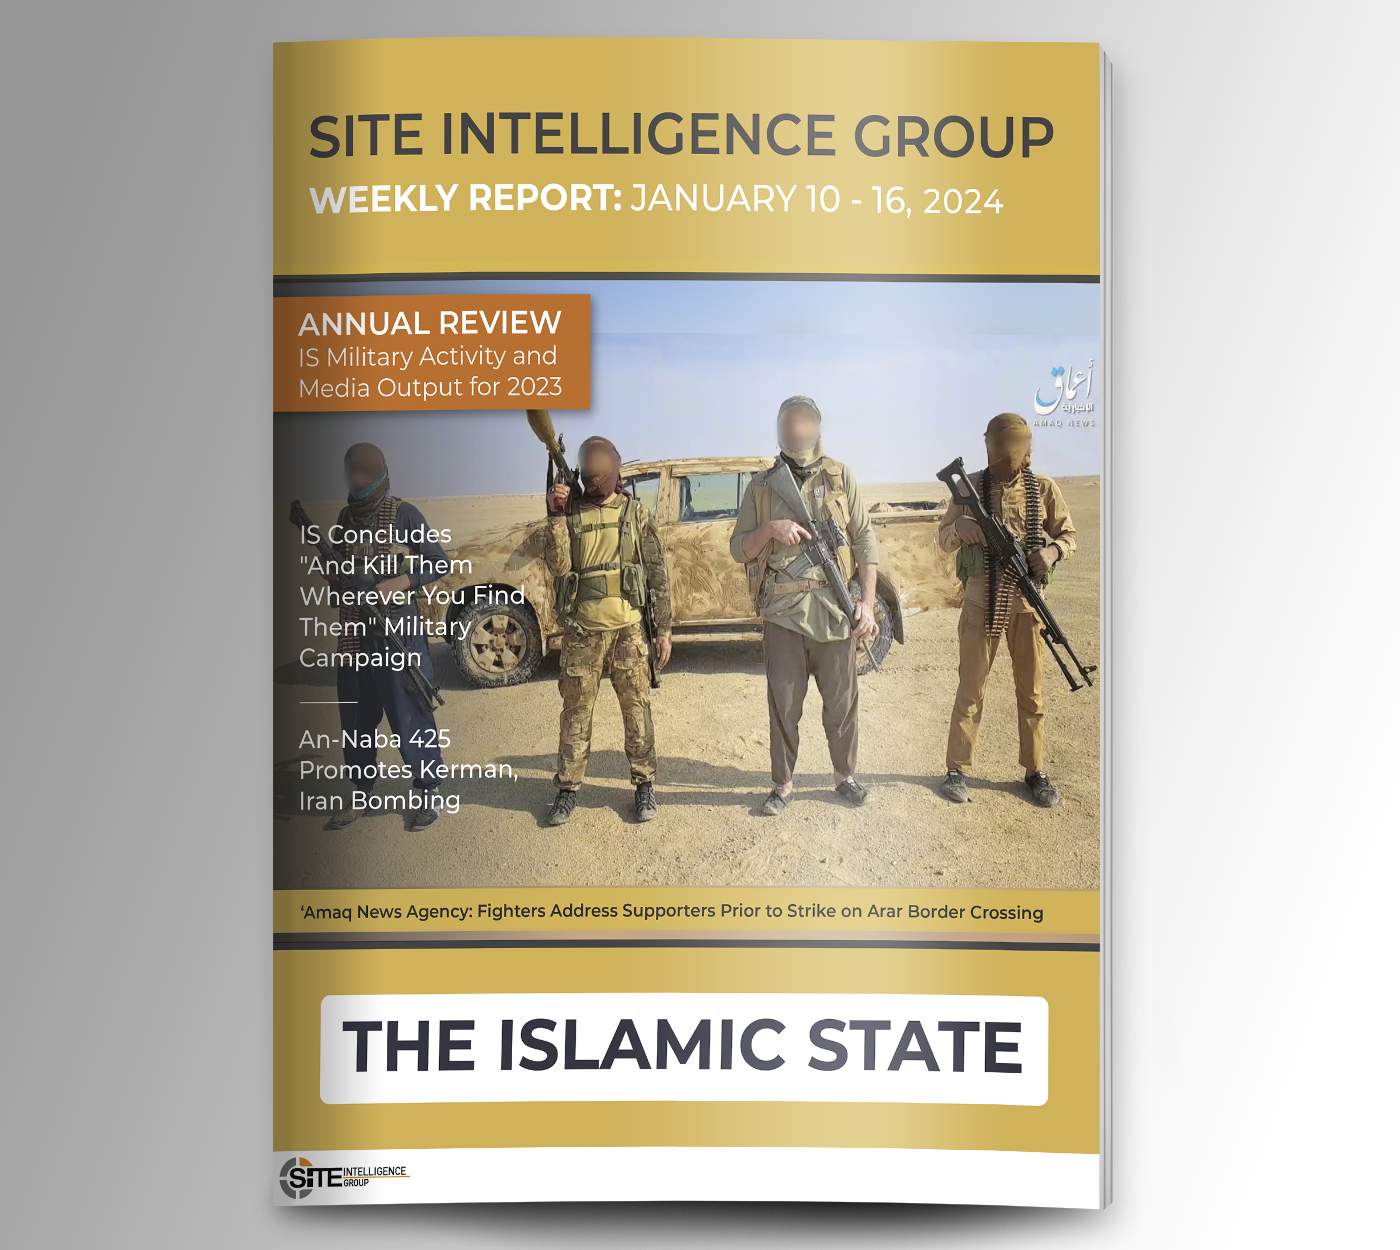 Weekly inSITE on the Islamic State for January 10-16, 2024